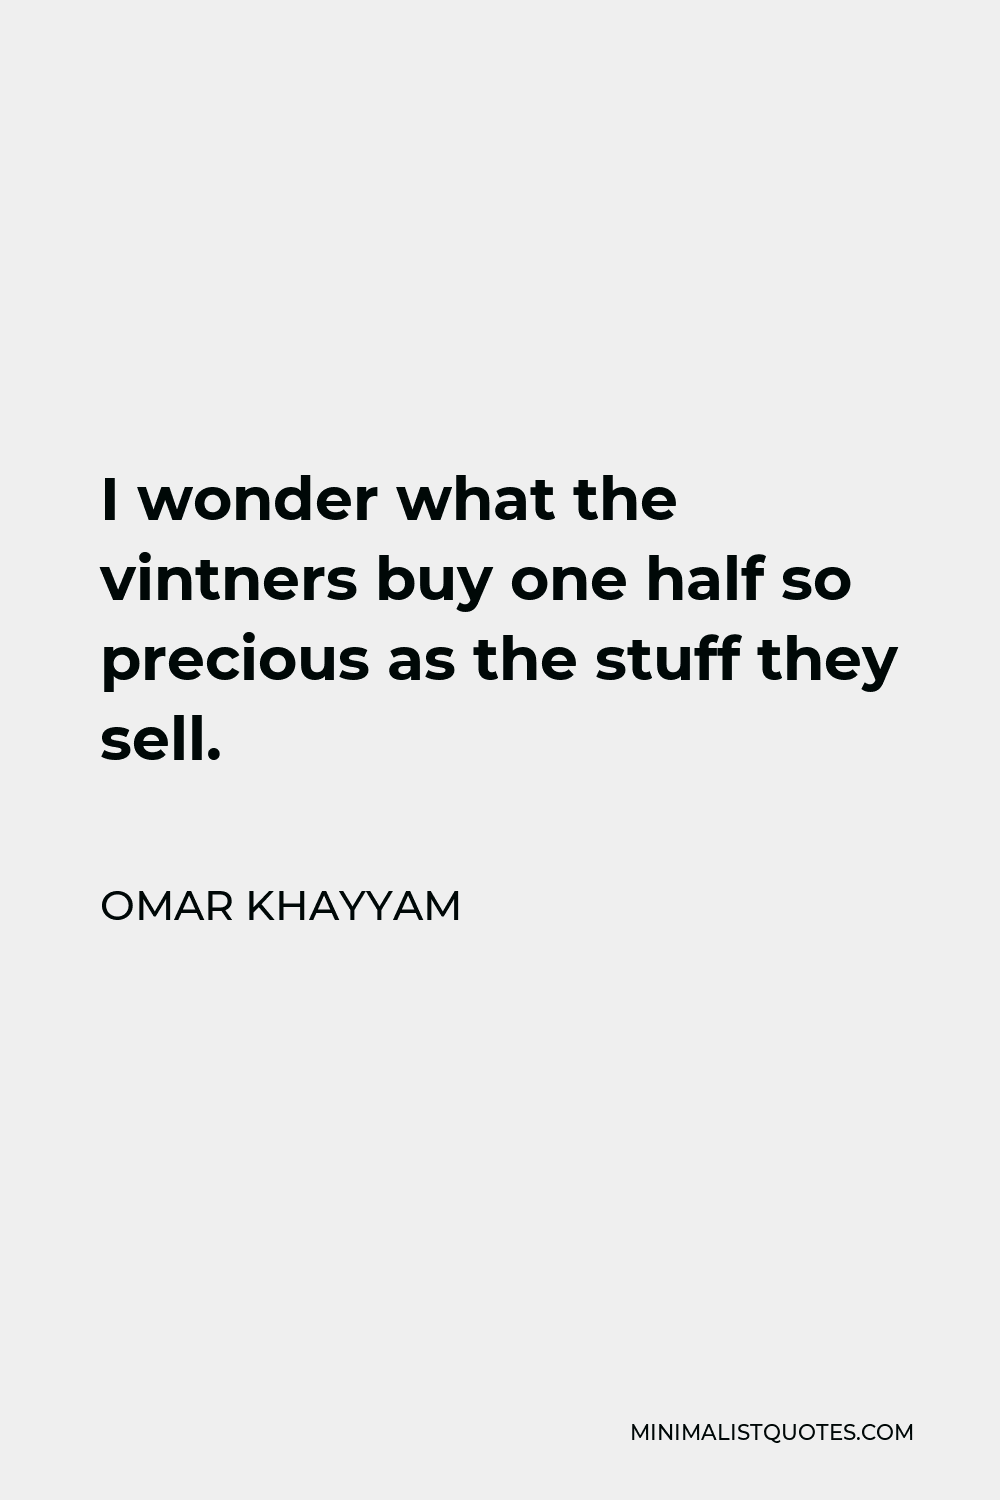 Omar Khayyam Quote - I wonder what the vintners buy one half so precious as the stuff they sell.